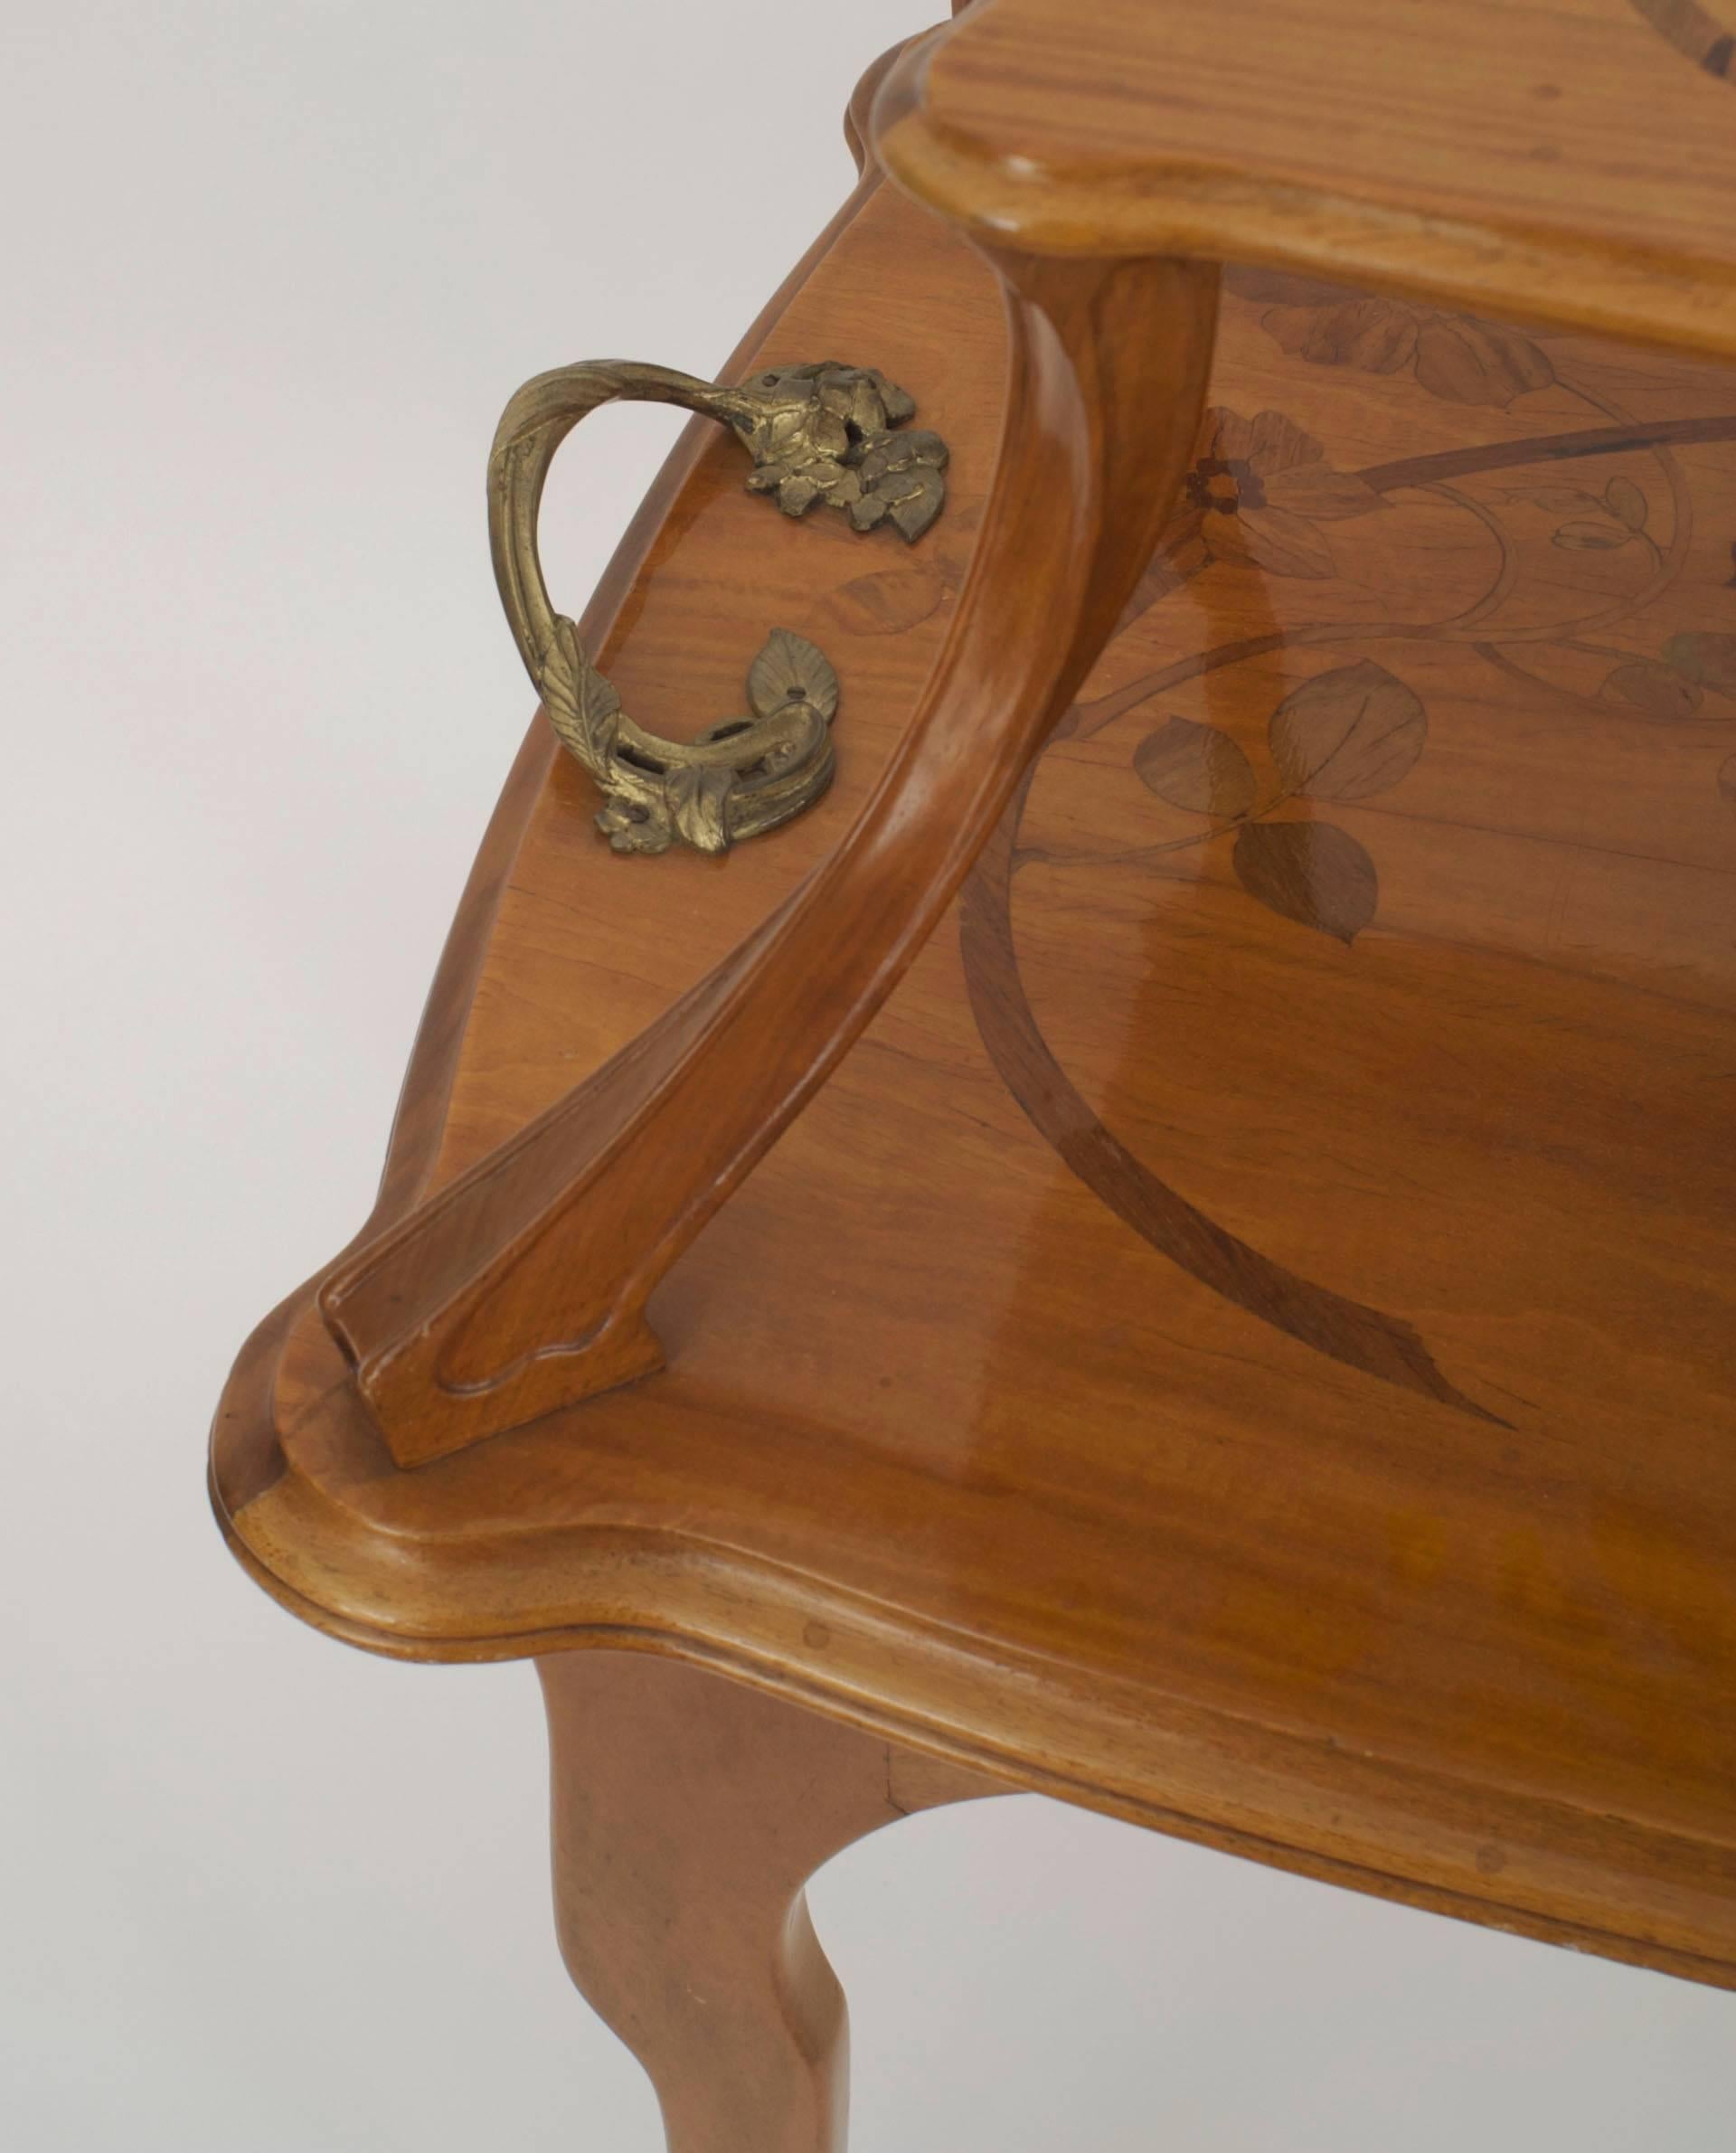 French Art Nouveau walnut rectangular two-tier table with floral inlaid design and bronze floral design side handles (signed MAJORELLE).